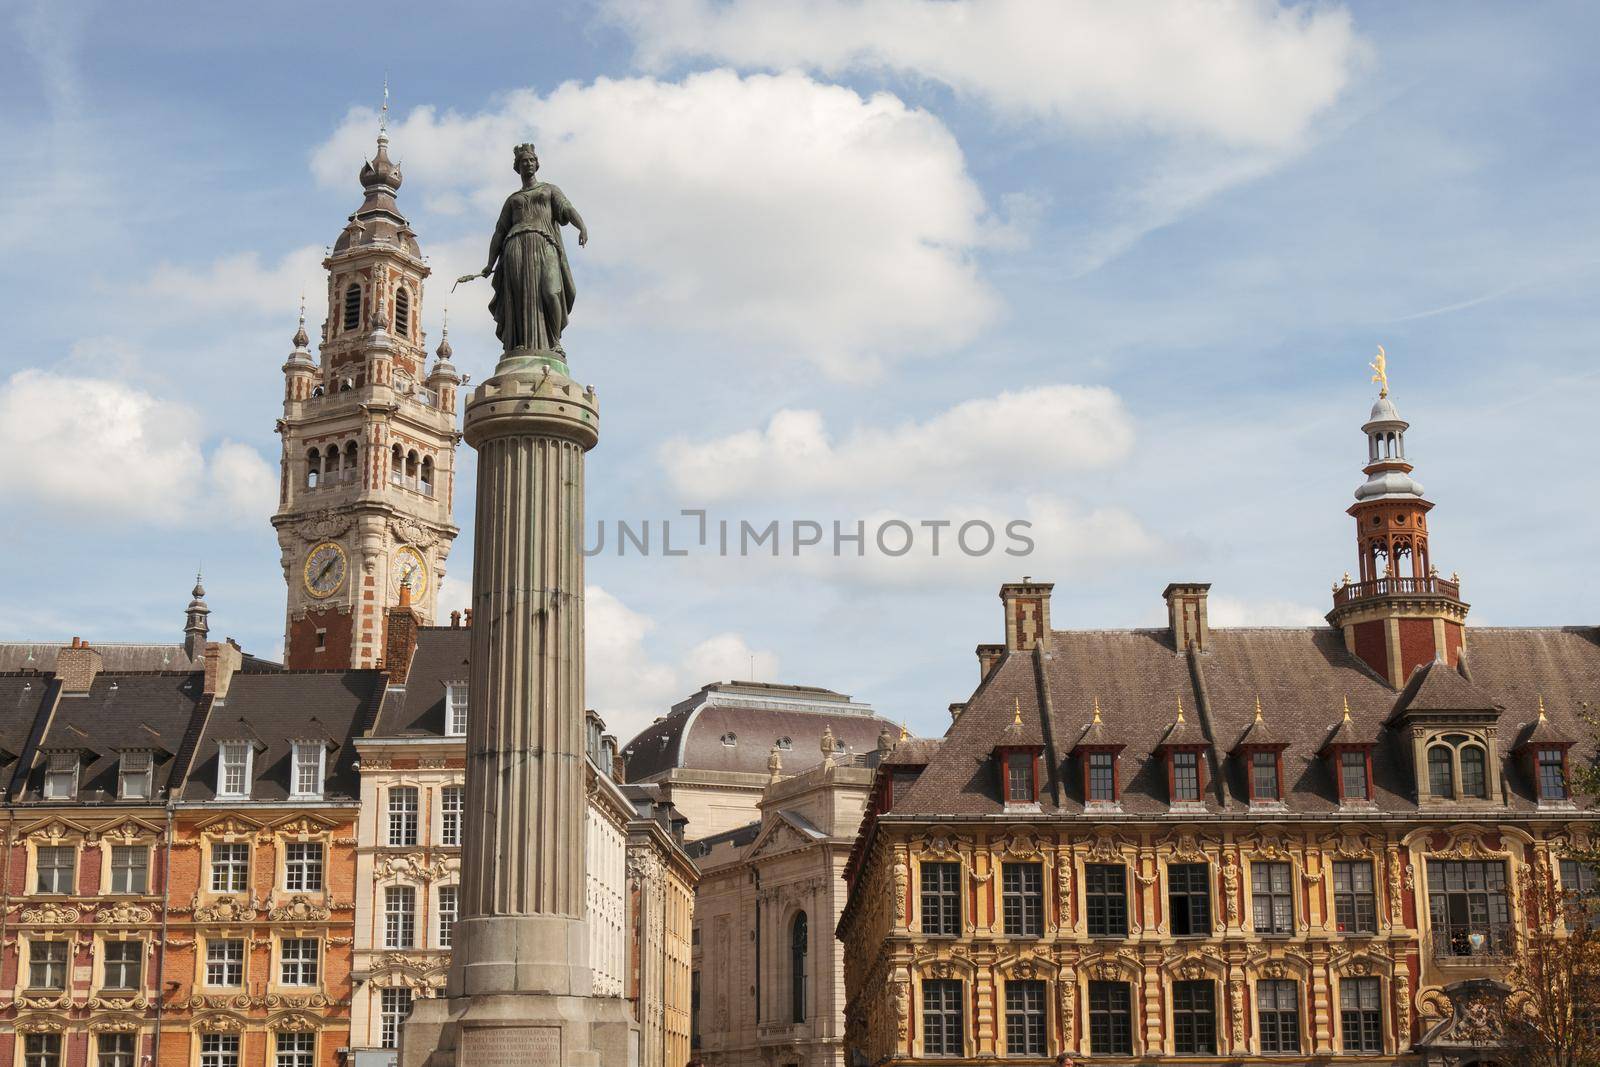 Historic facades at the Grand Place in the city of Lille, the belfry of the Chambre de Commerce in background.